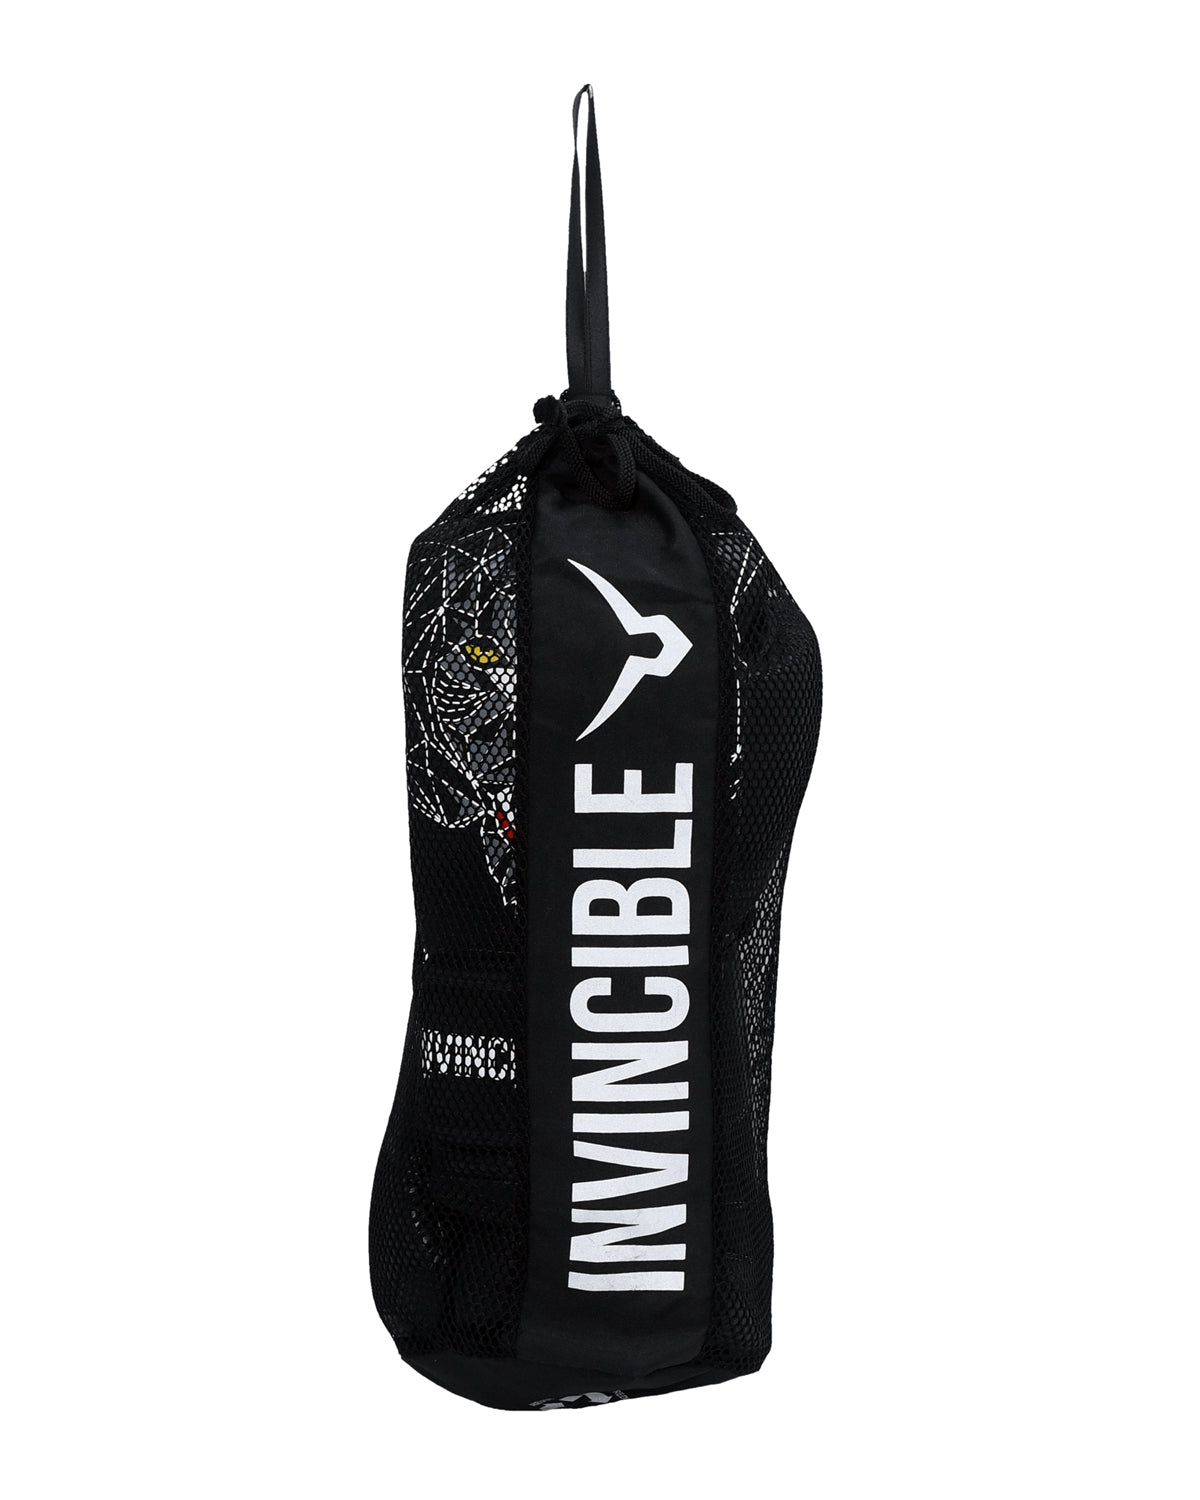 Invincible Limited Edition Combat Gloves